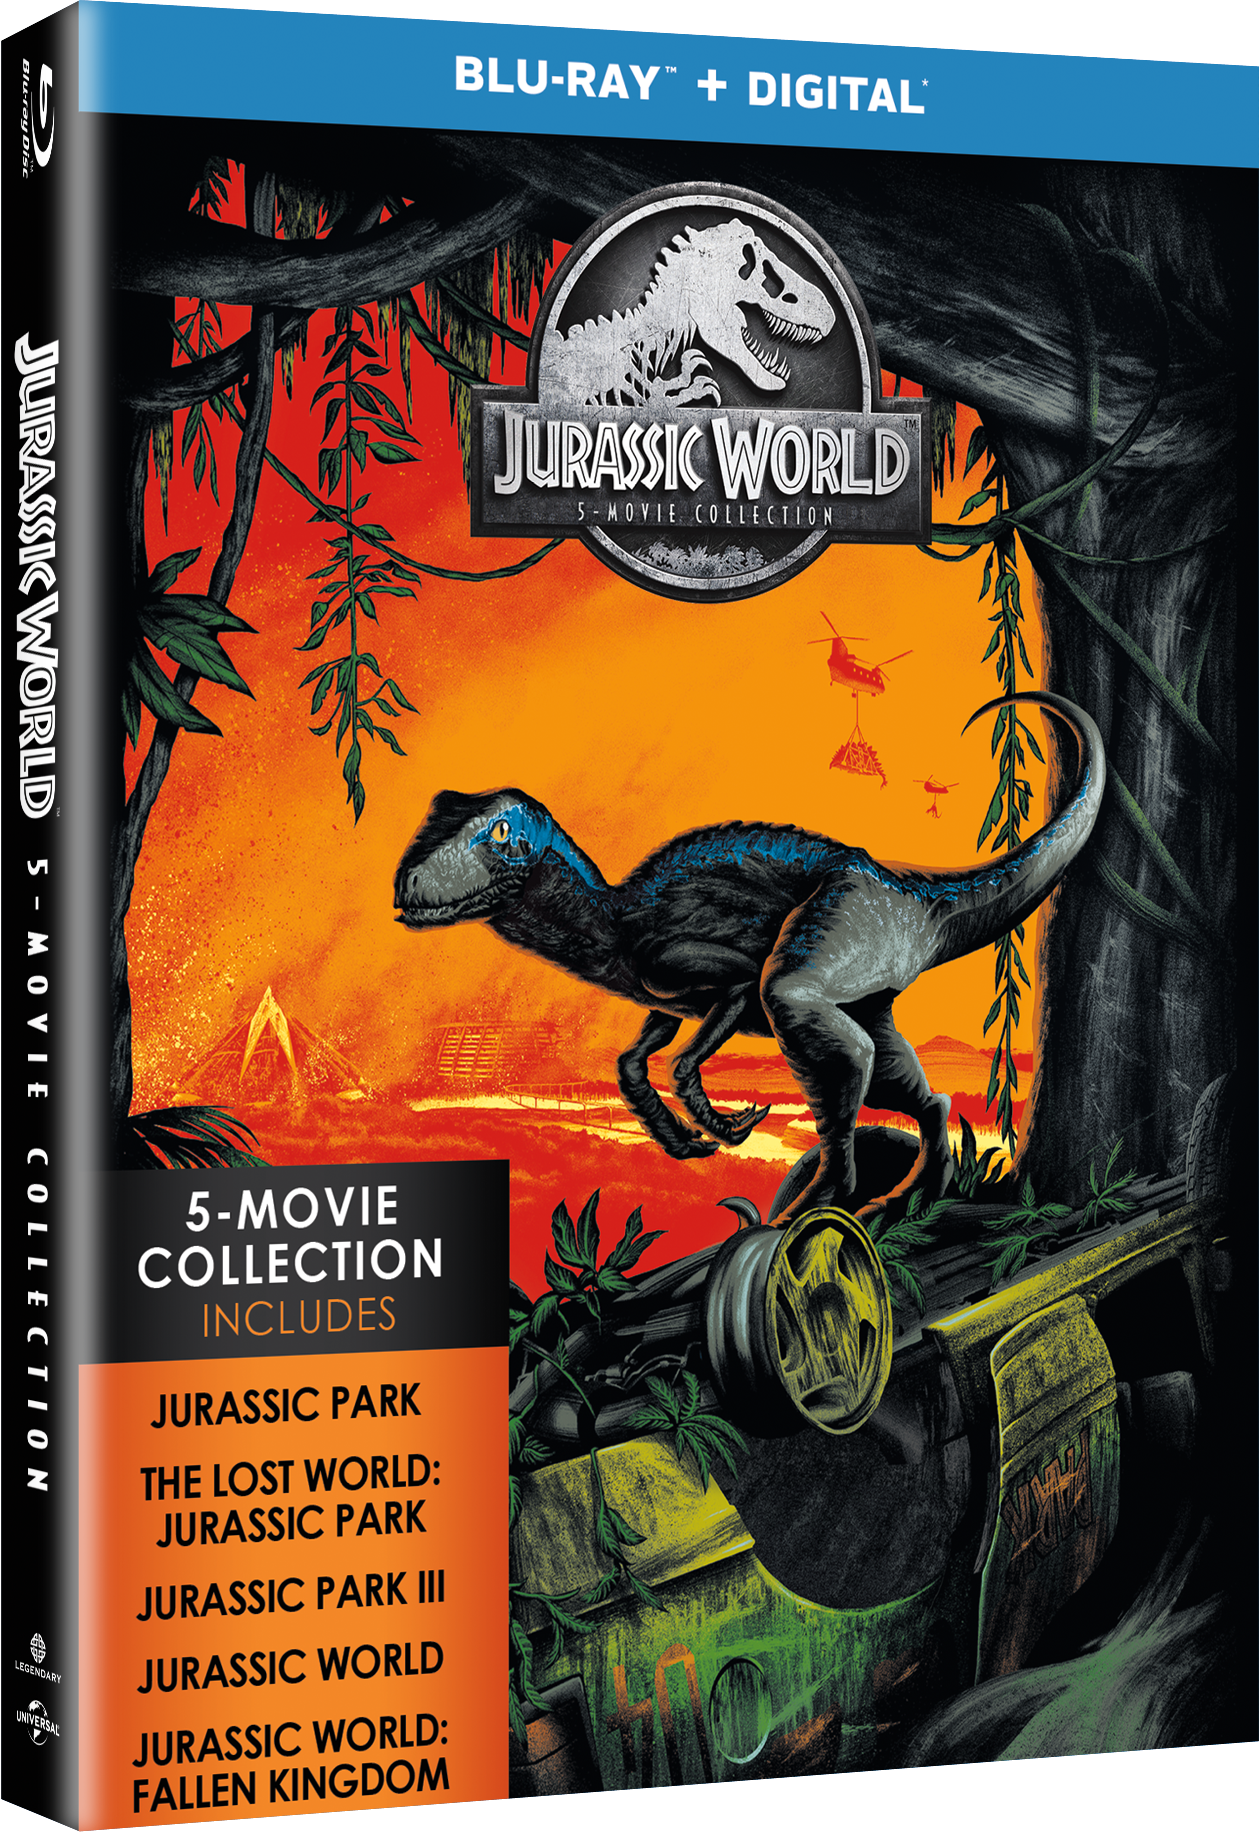 NEW Followers Giveaway, Jurassic World 5-Movie-Collection!